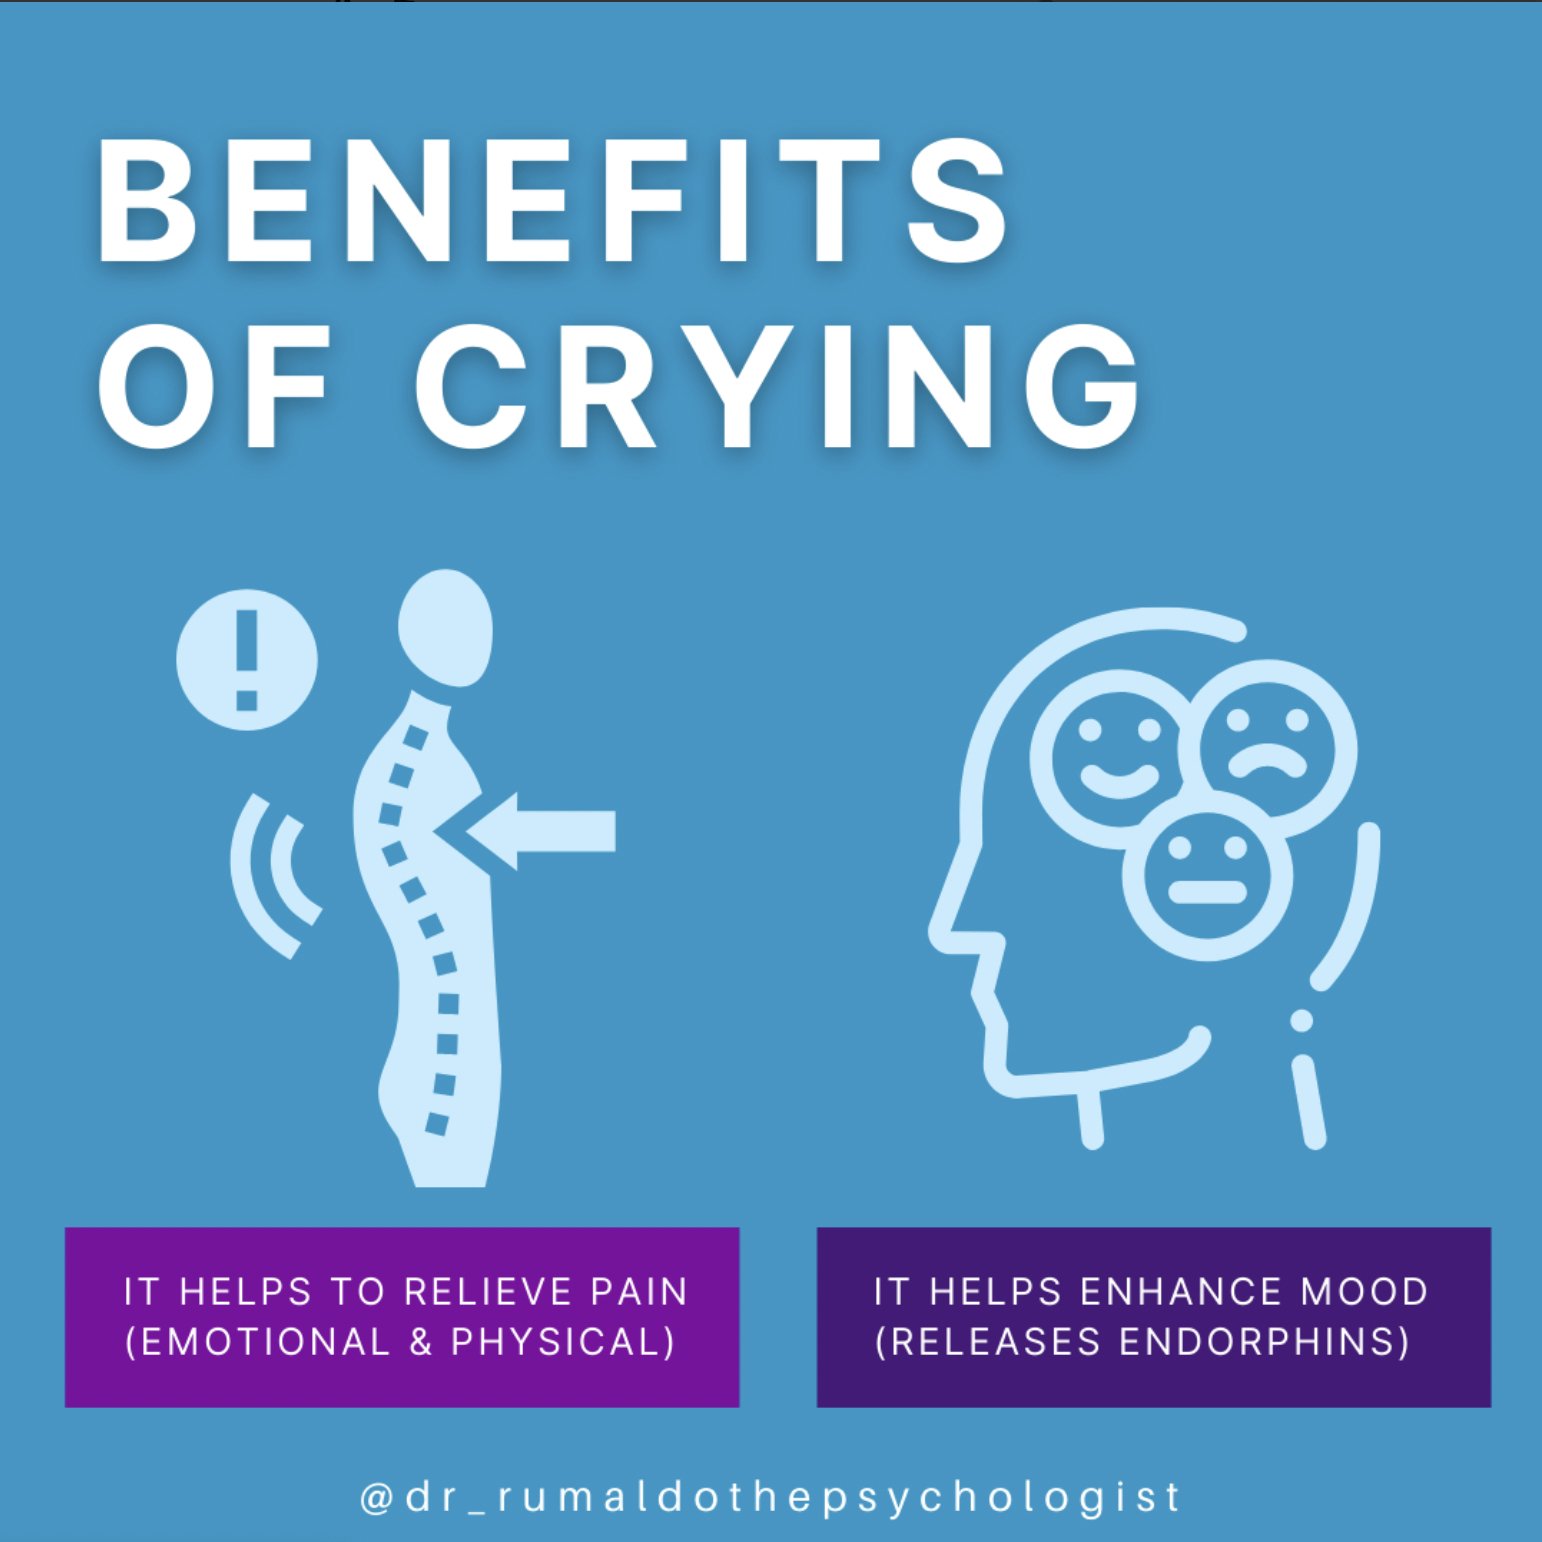 The benefits of tears